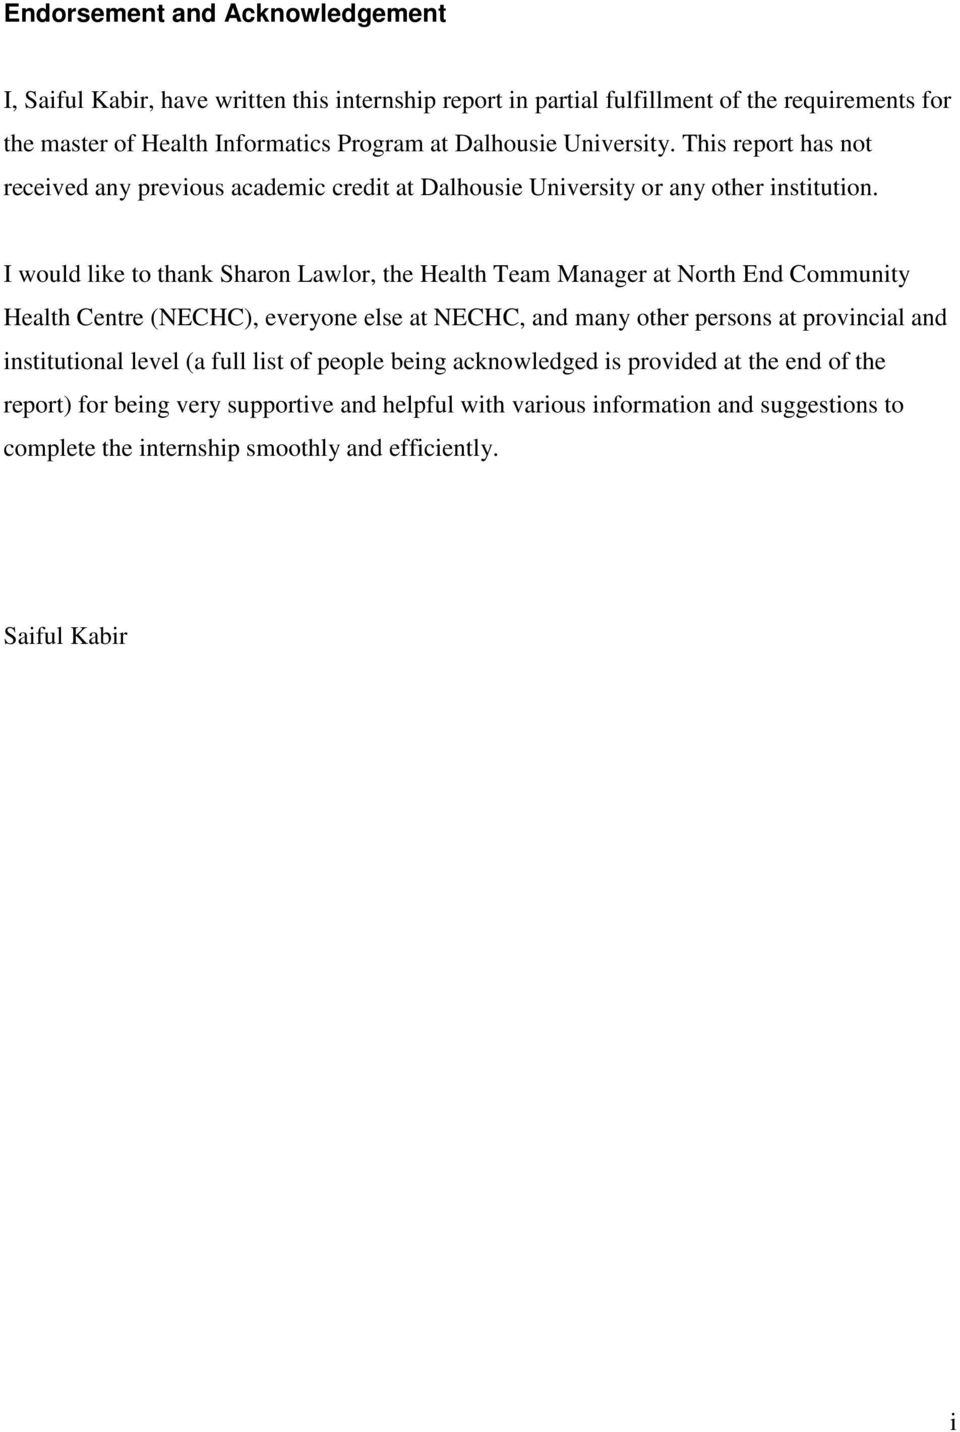 I would like to thank Sharon Lawlor, the Health Team Manager at North End Community Health Centre (NECHC), everyone else at NECHC, and many other persons at provincial and